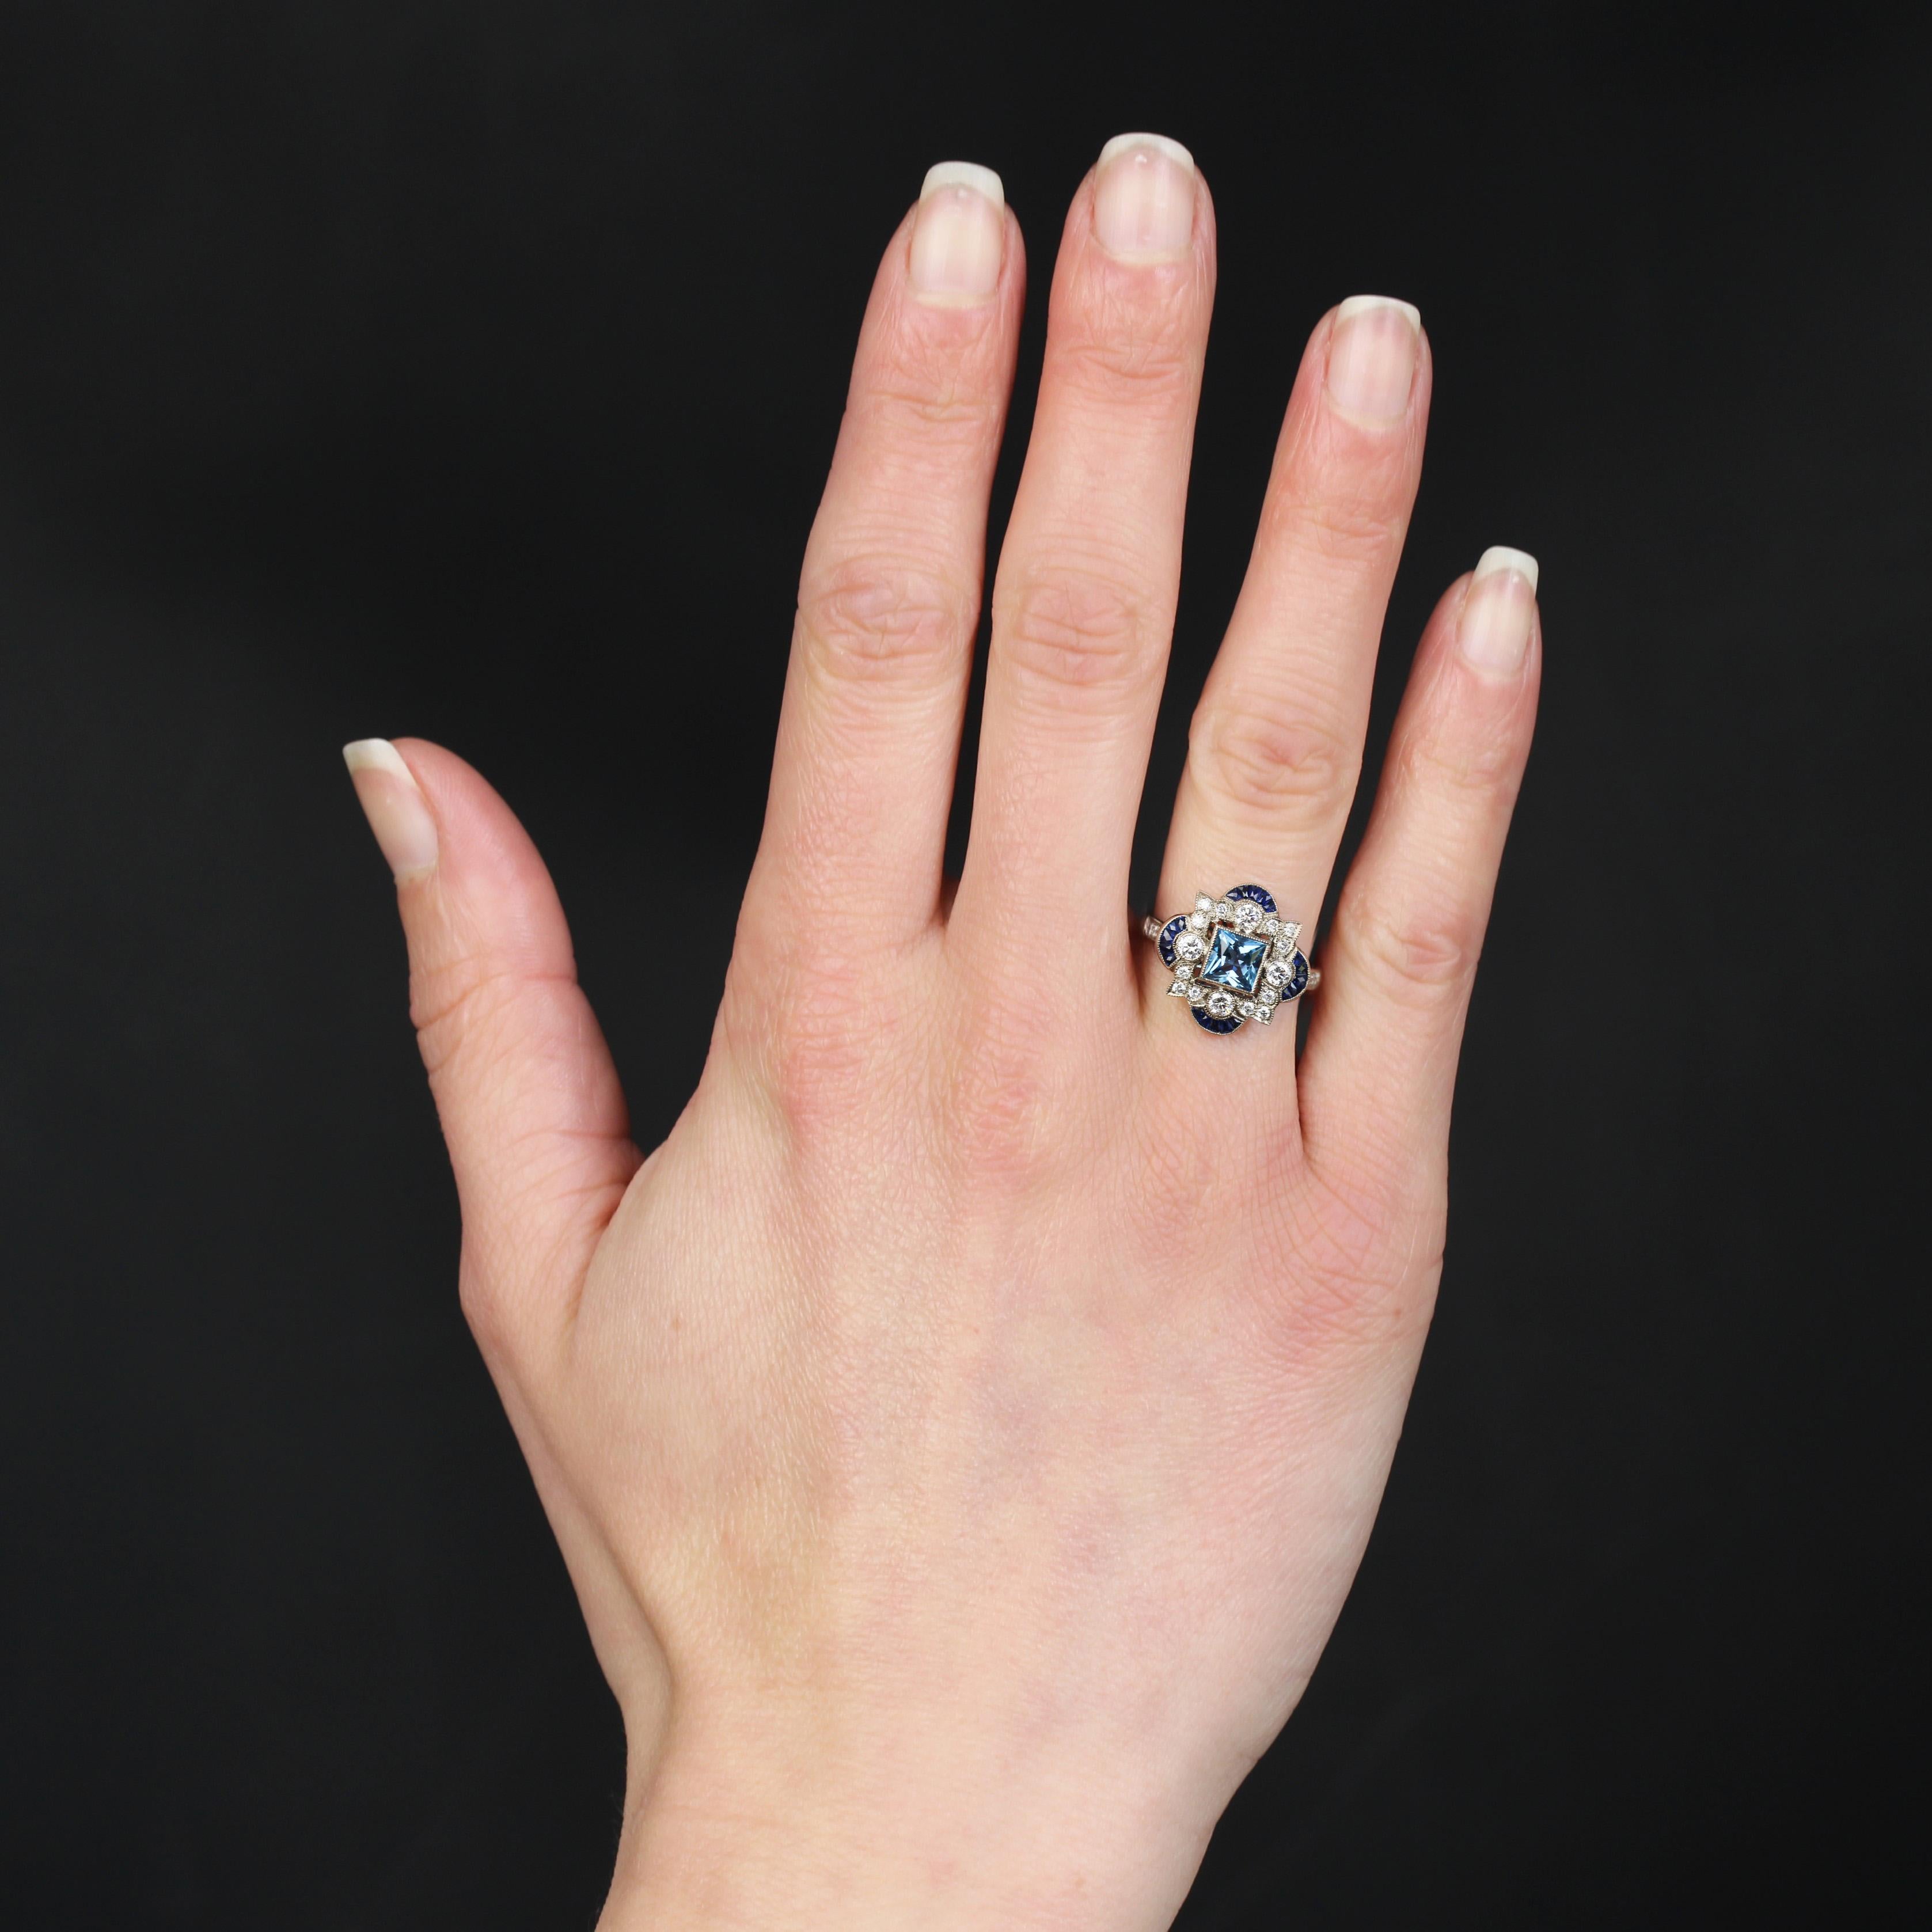 Ring in 18 karat white gold.
This Art Deco-style ring is set with a square aquamarine in millegrain closed setting in the center of an openwork design set with modern brilliant-cut diamonds in millegrain setting. At each cardinal point of the